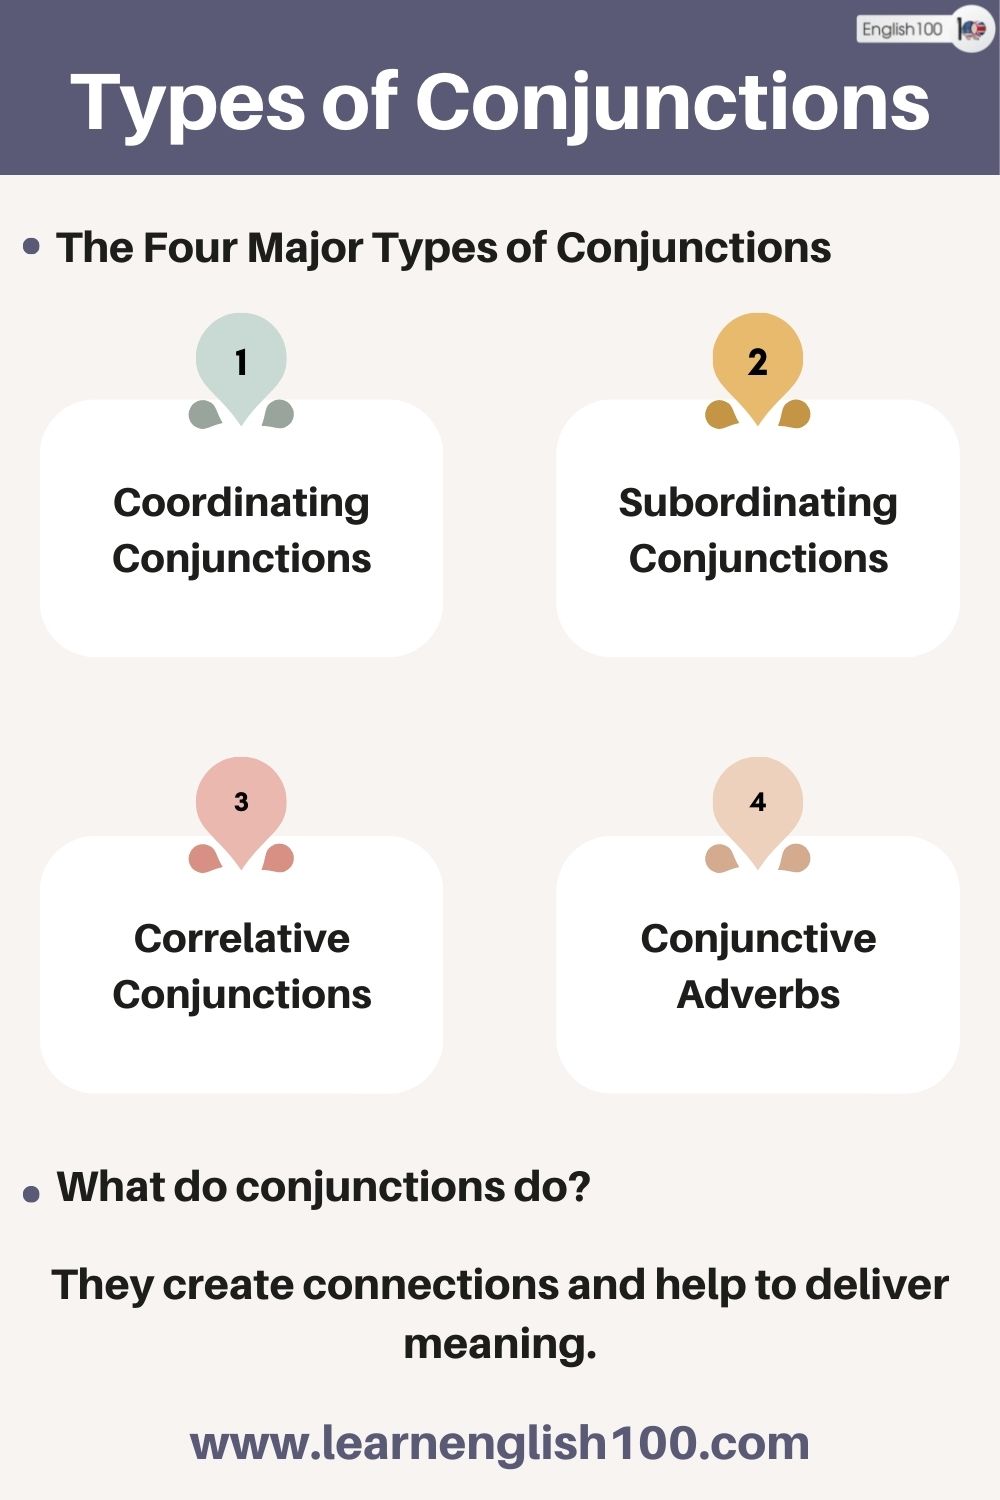 Types of Conjunctions